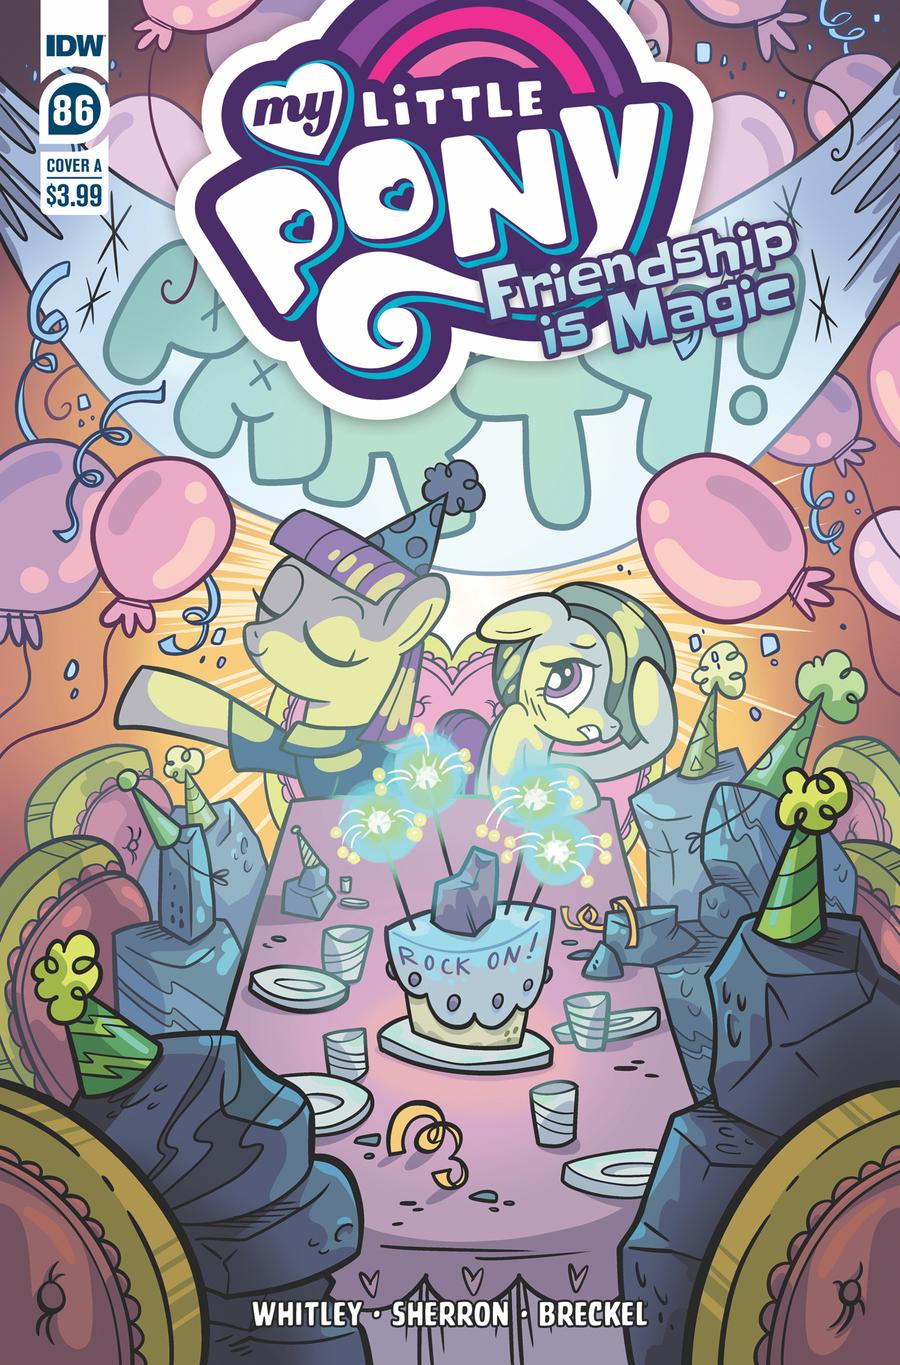 My Little Pony Friendship Is Magic #86 Cover A Regular Kate Sherron Cover